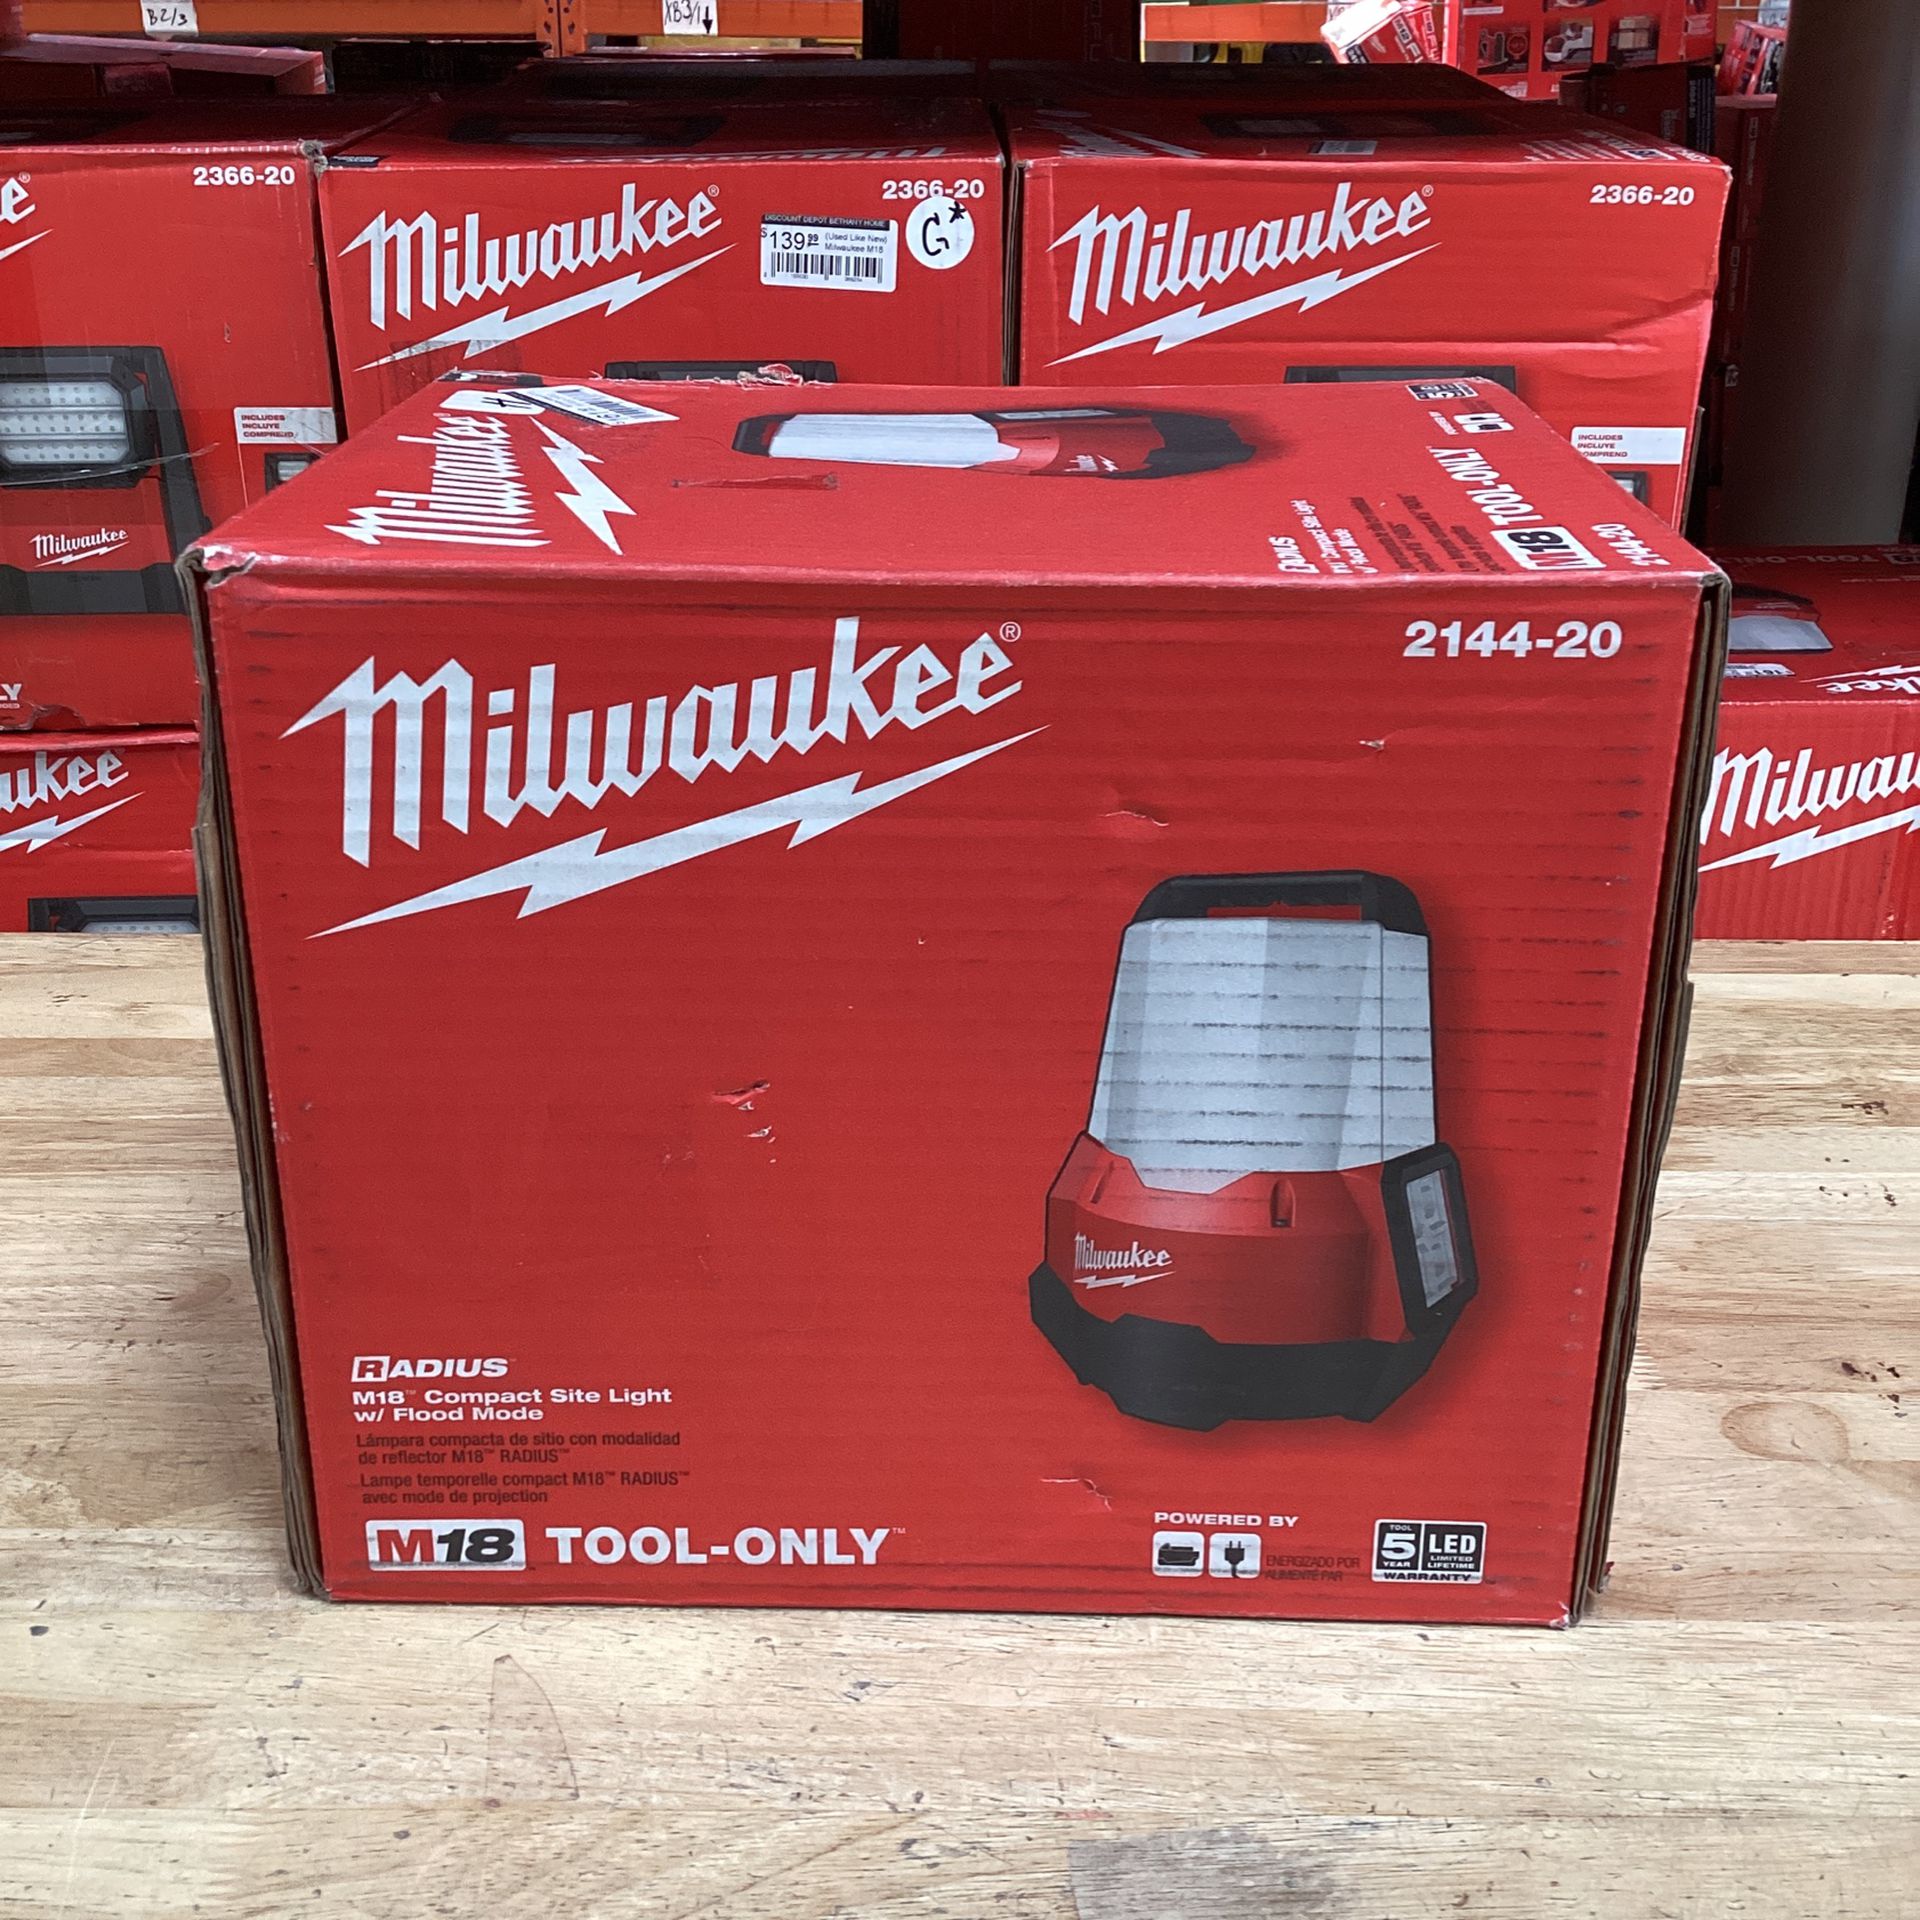 (NEW) Milwaukee M18 18-Volt 2200 Lumens Cordless Radius LED Compact Site Light with Flood Mode (Tool-Only)